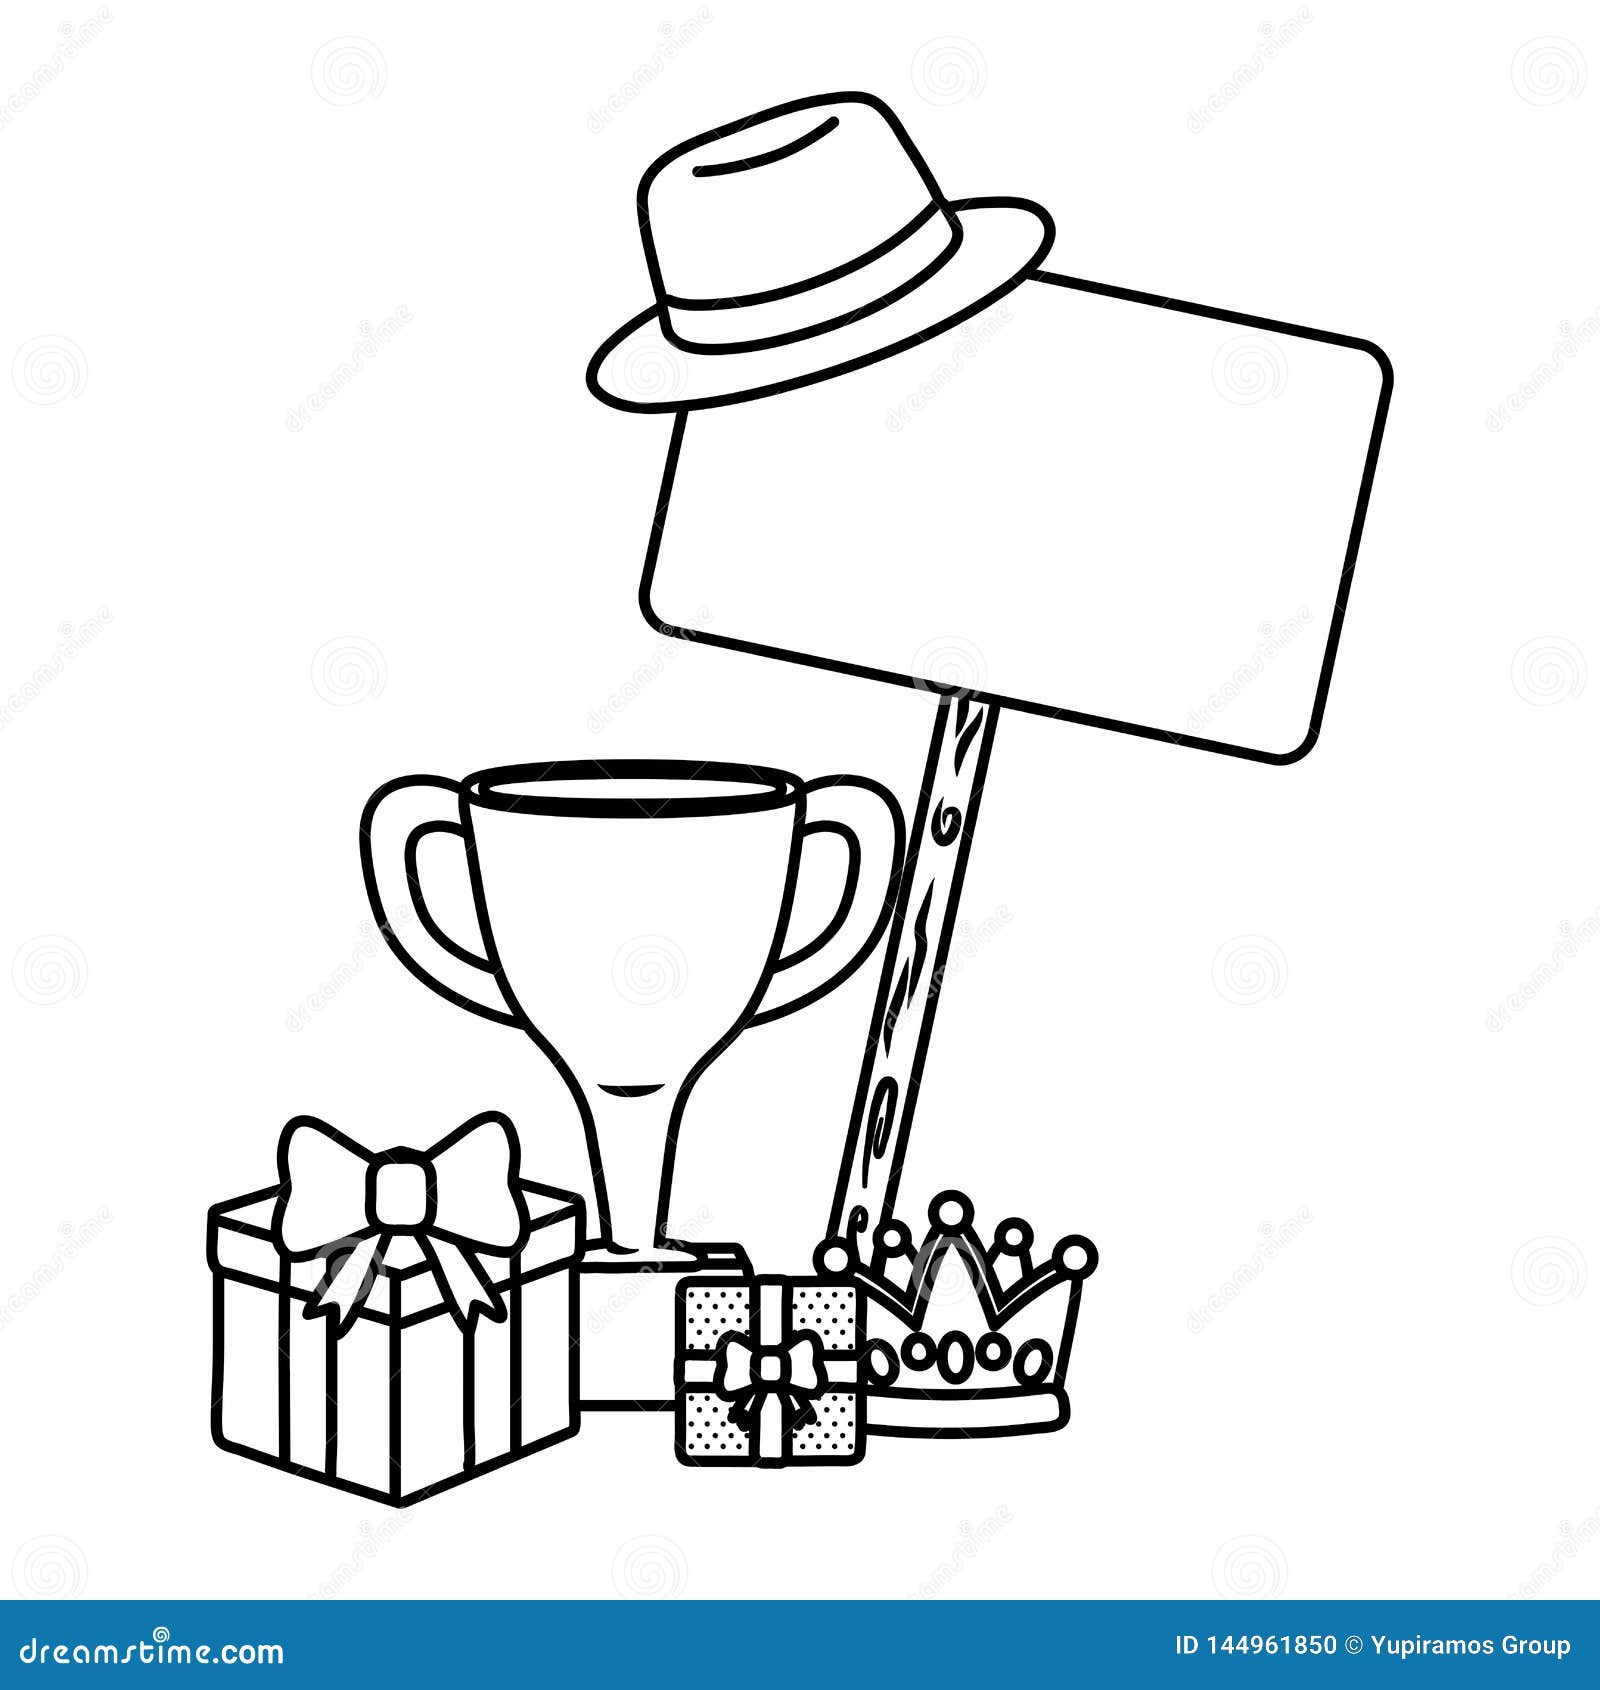 100,000 Gift drawing Vector Images